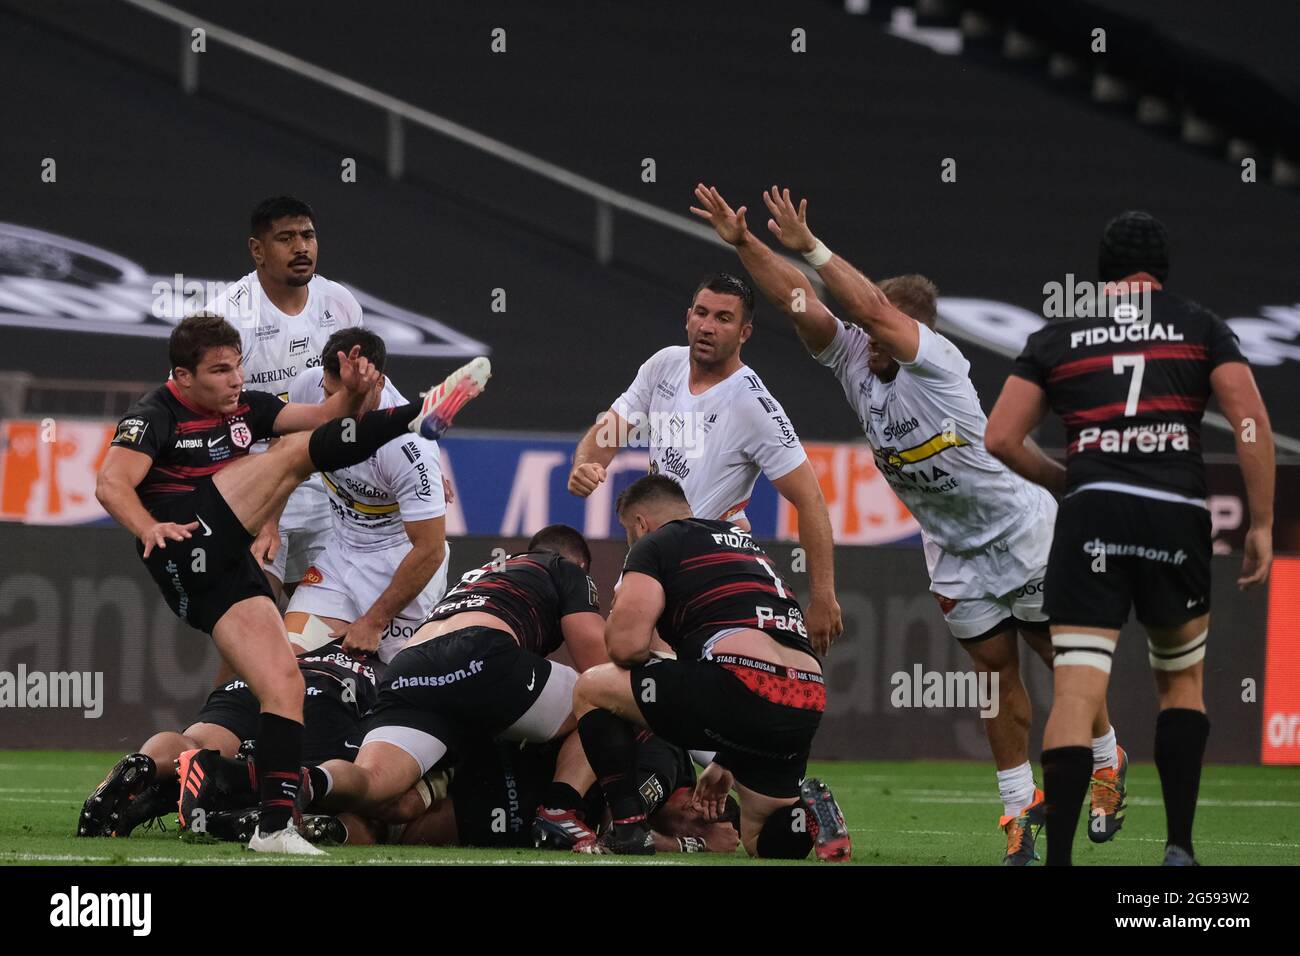 Paris, France. 26th June, 2021. Stade Toulousain Scrum half ANTOINE DUPONT player of the match in action during the final French rugby Championship 14 between Stade Toulousain and Stade Rochelais